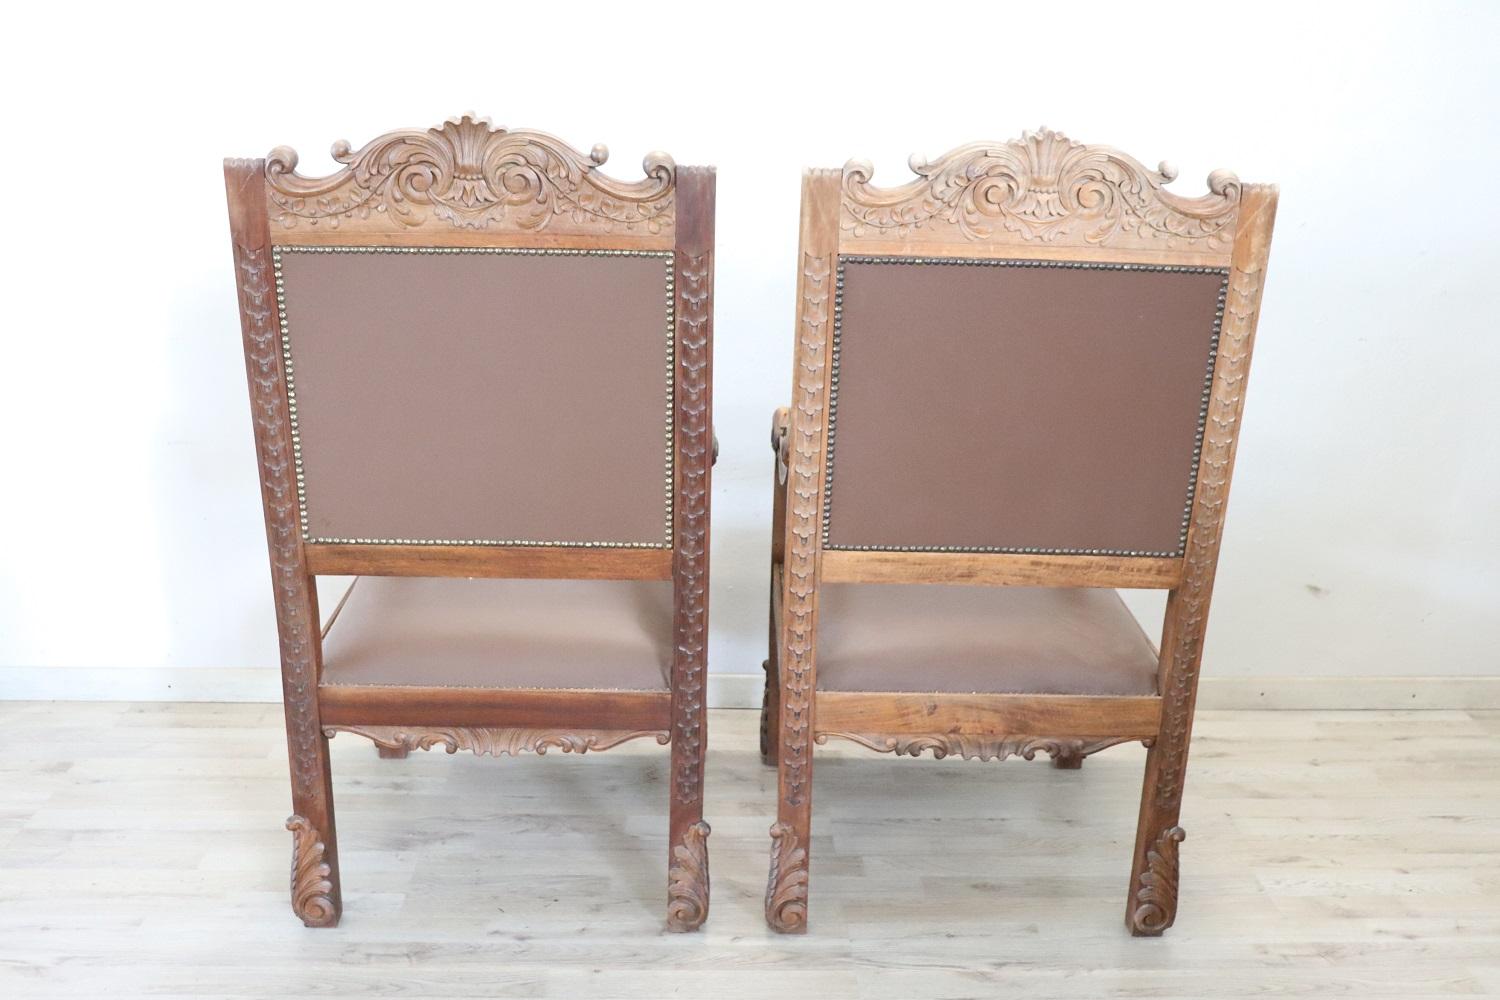 Late 19th Century Italian Renaissance Style Carved Walnut Pair of Throne Chairs For Sale 6